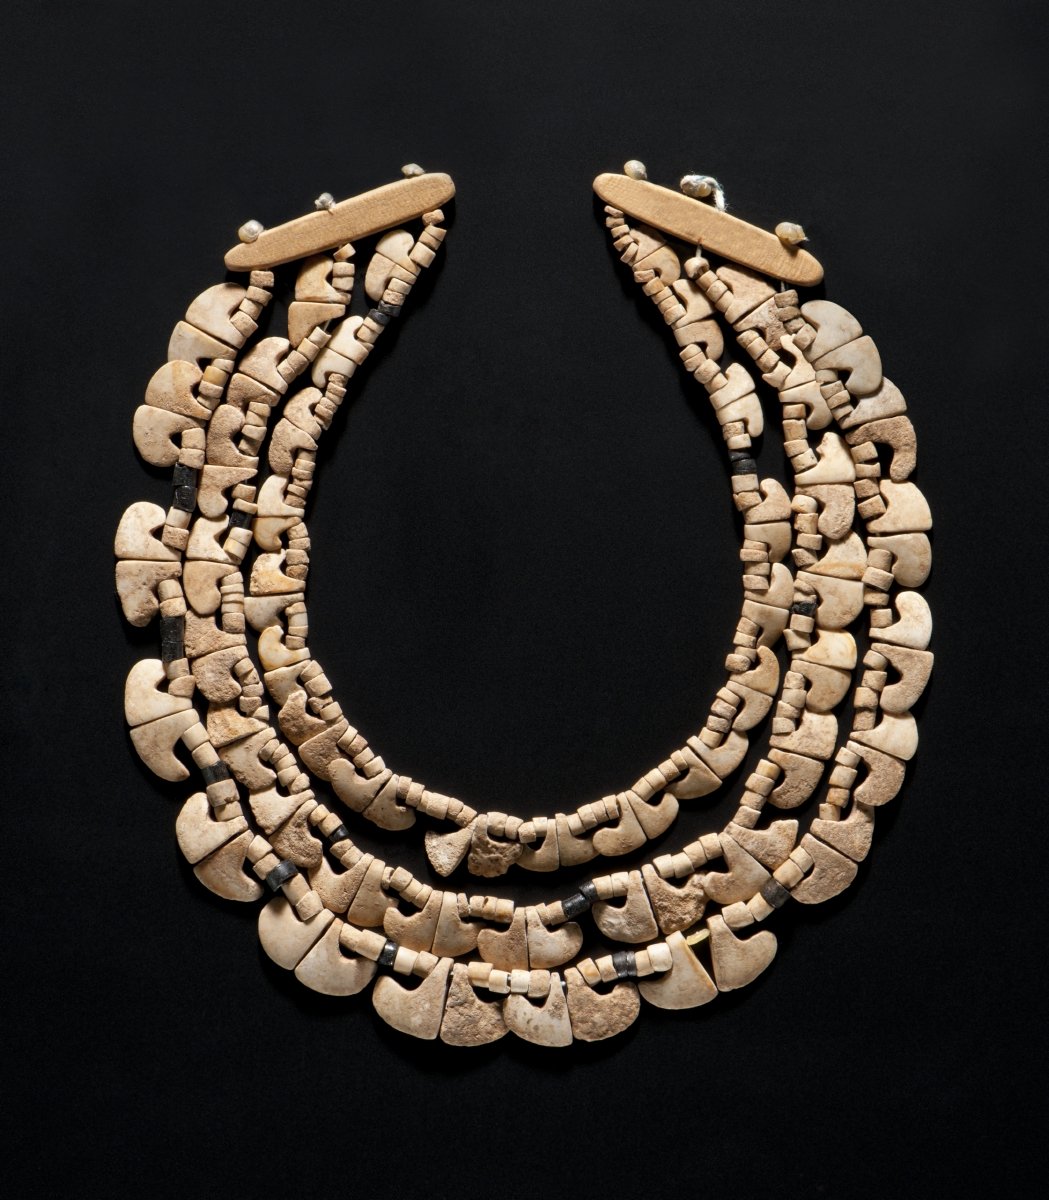 En vogue around 6,000 years ago: an amazing #Neolithic three-row necklace consisting of more than 500 (!) beads made from limestone and jet. From Sachsenheim, dating around 4,000 BC. Photo: Landesmuseum Württemberg